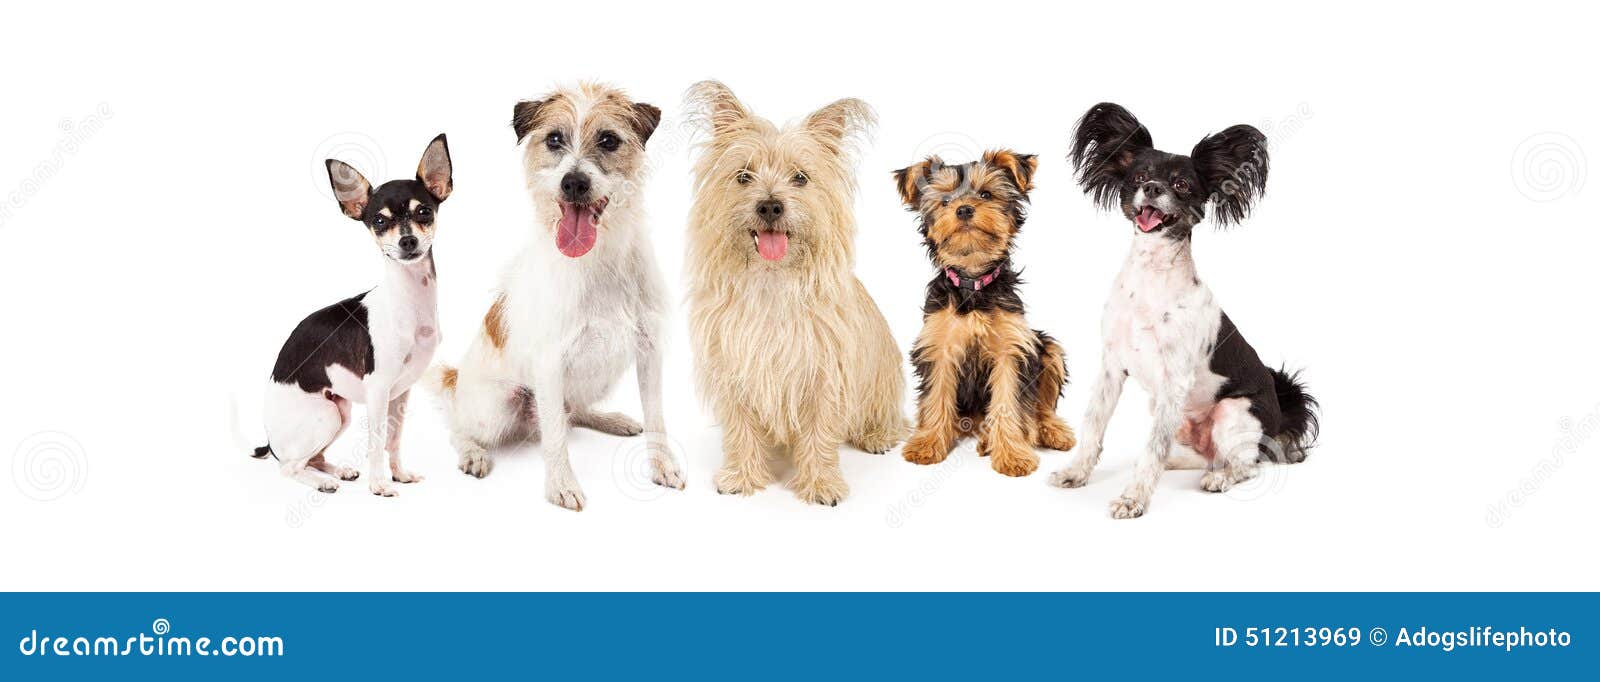 common small breed dogs